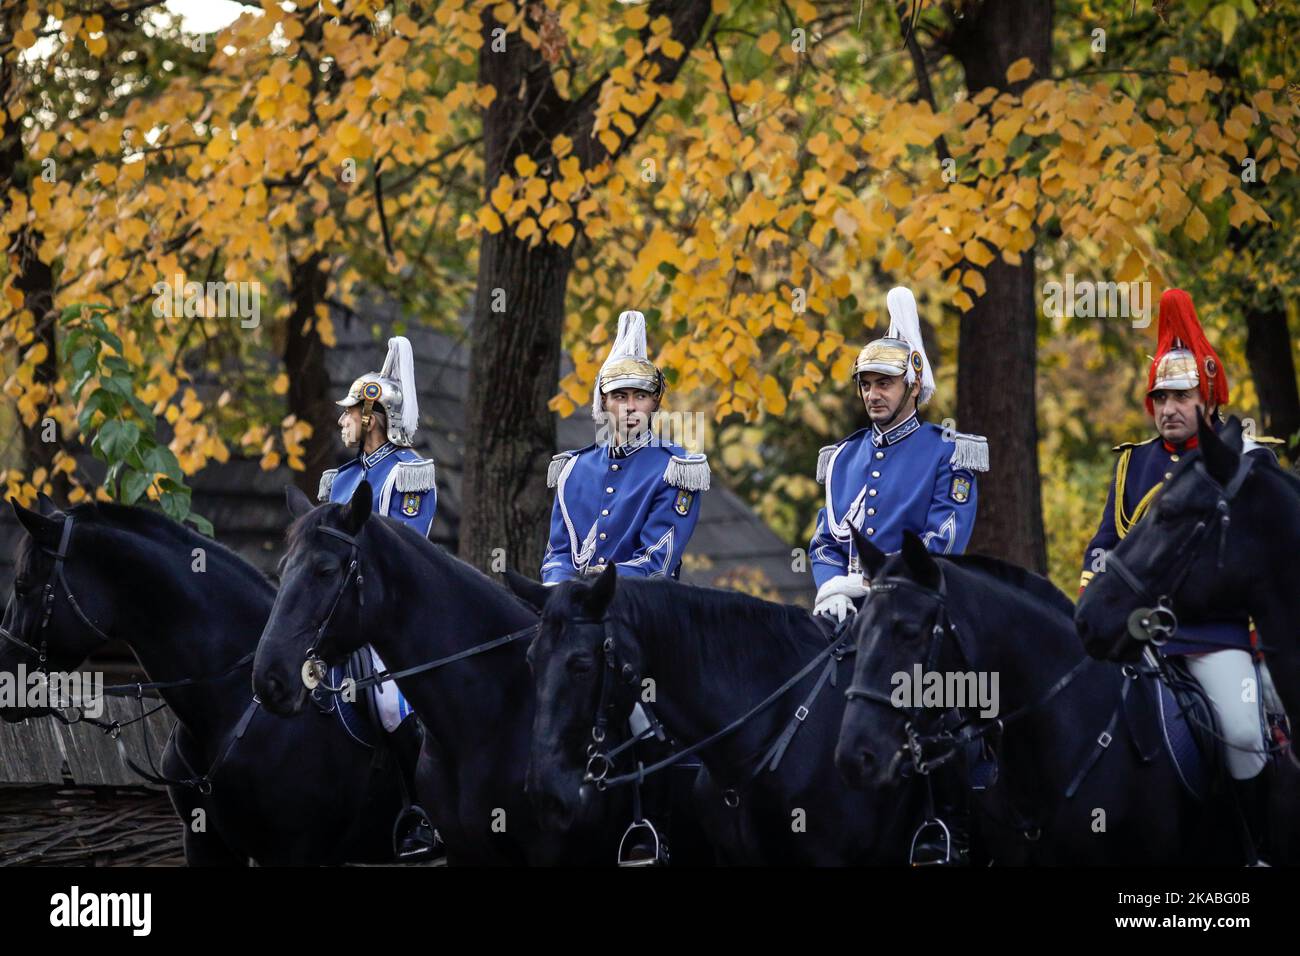 Bucharest, Romania - November 1, 2022: Mounted Romanian Jandarmi (horse riders from the Romanian Gendarmerie) in ceremonial and parade uniforms. Stock Photo